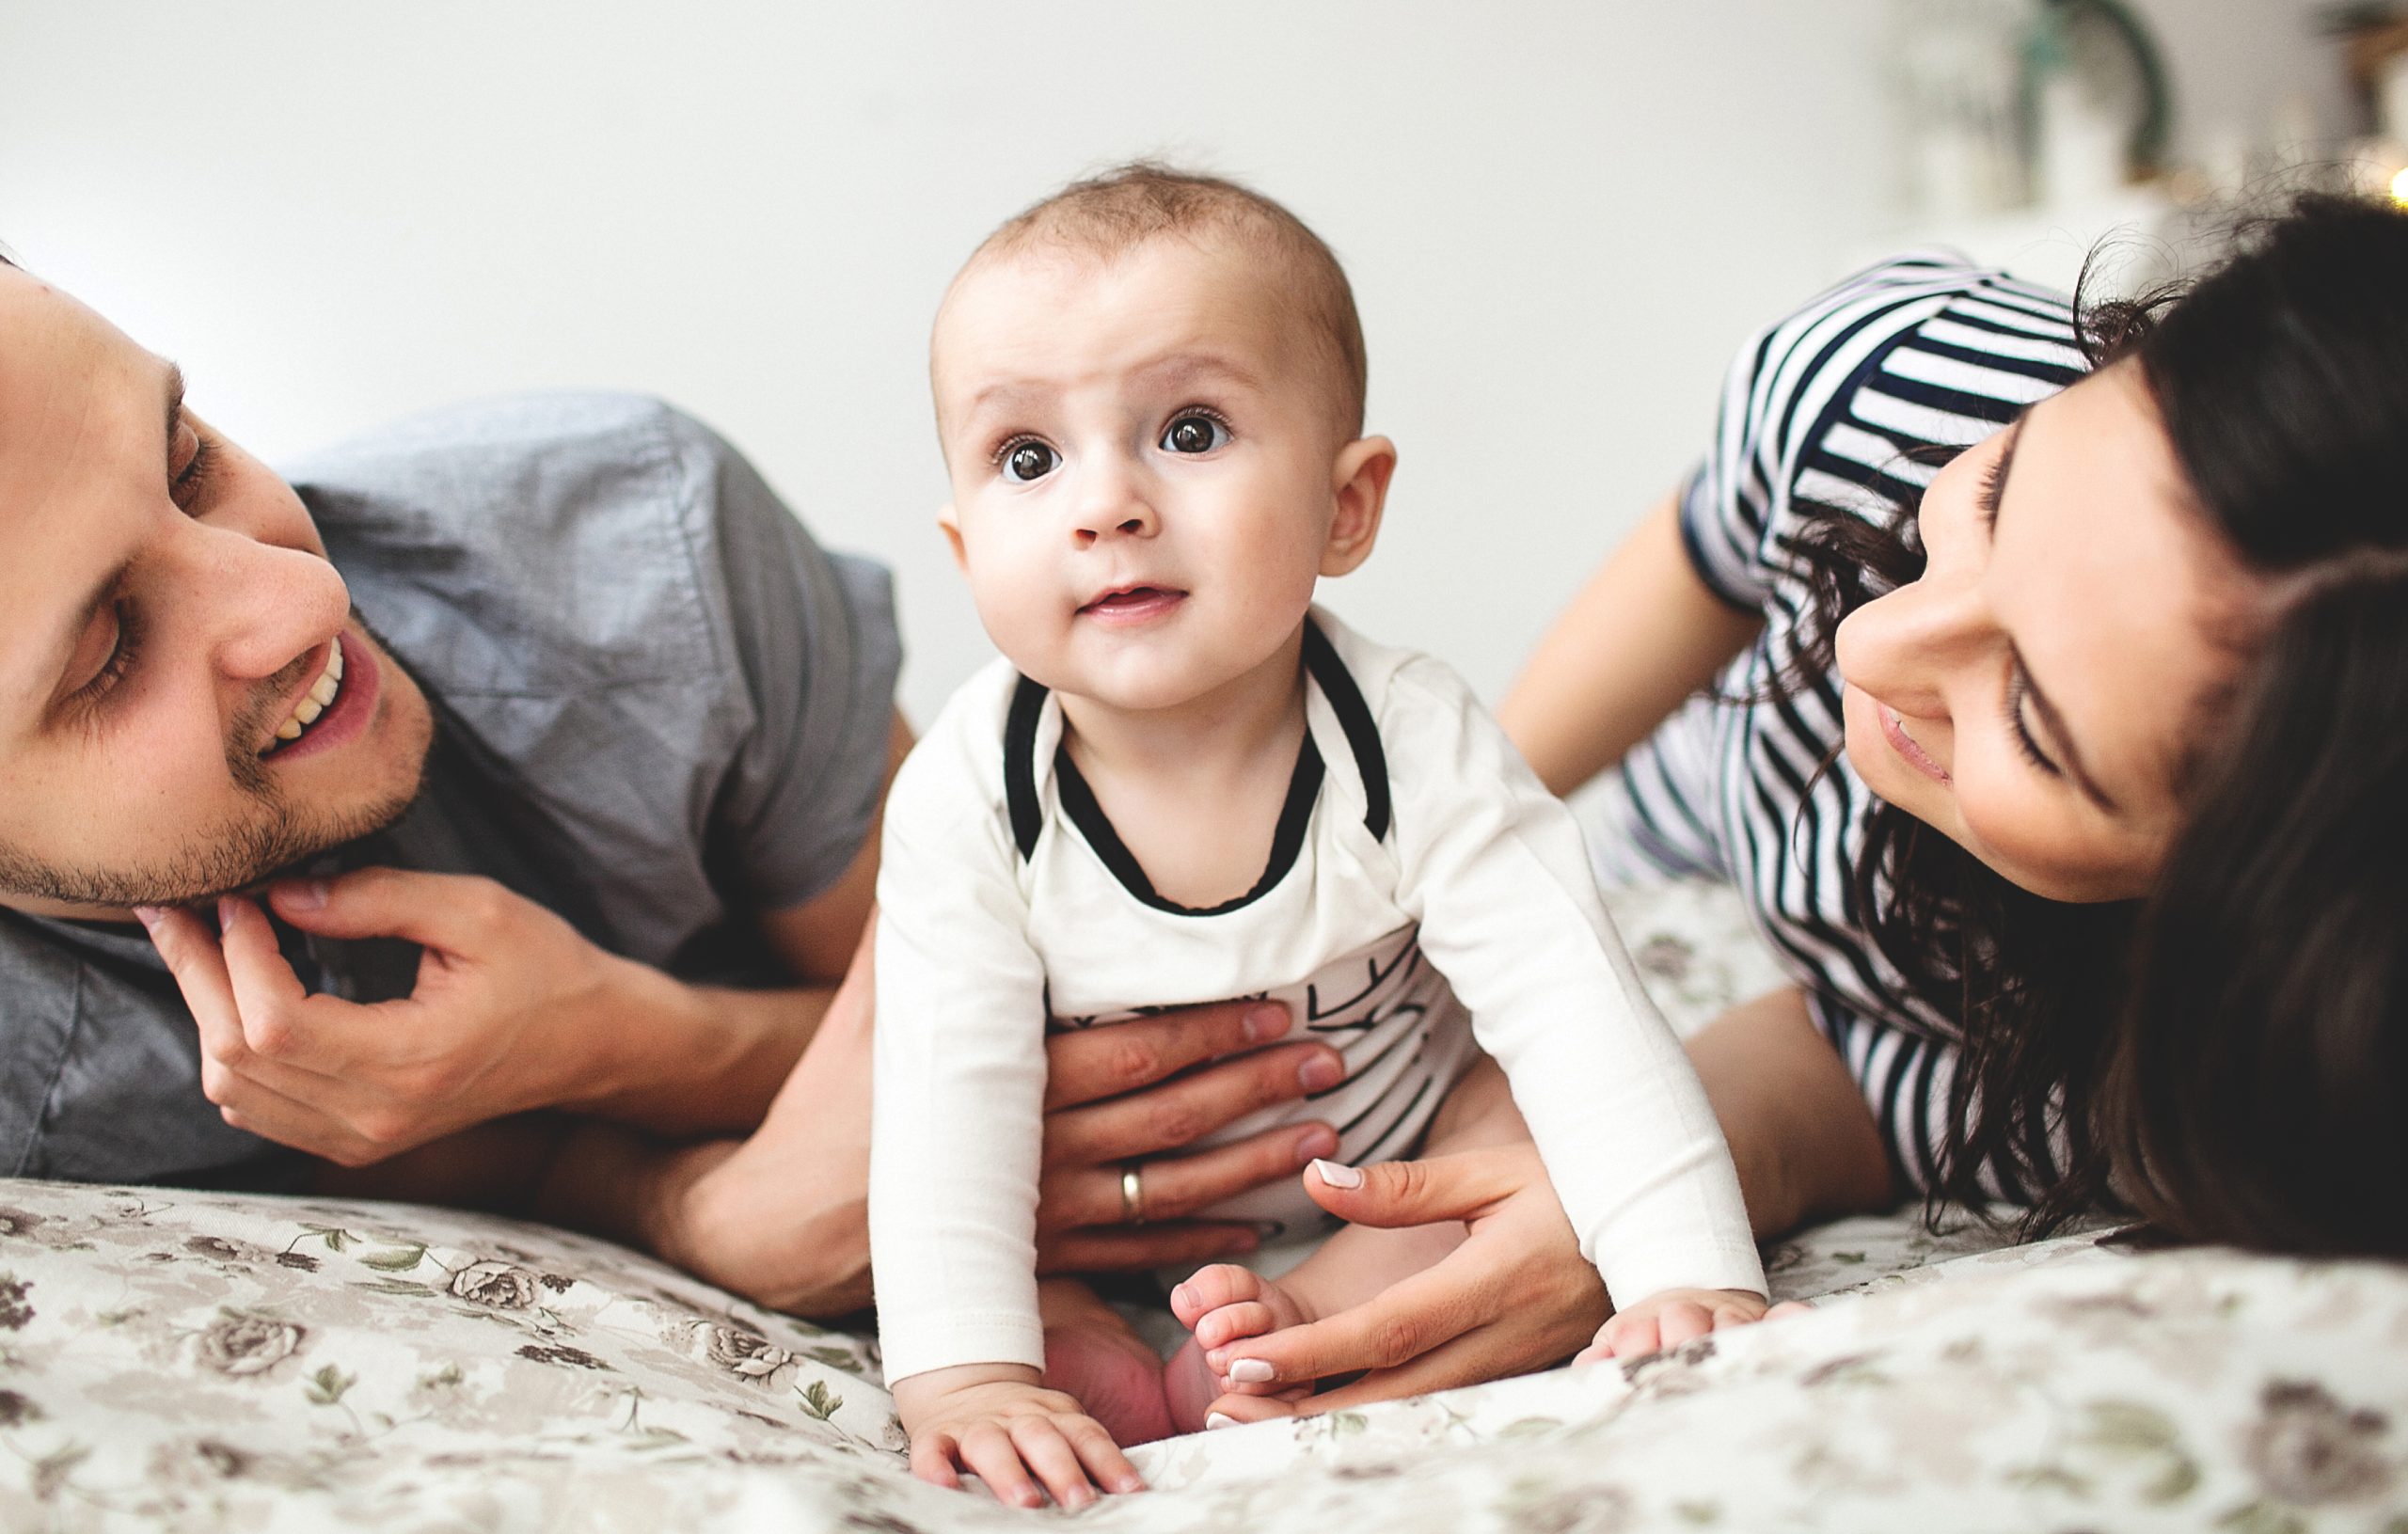 Young parents and their infant share a joyful moment together, a family dream realized.